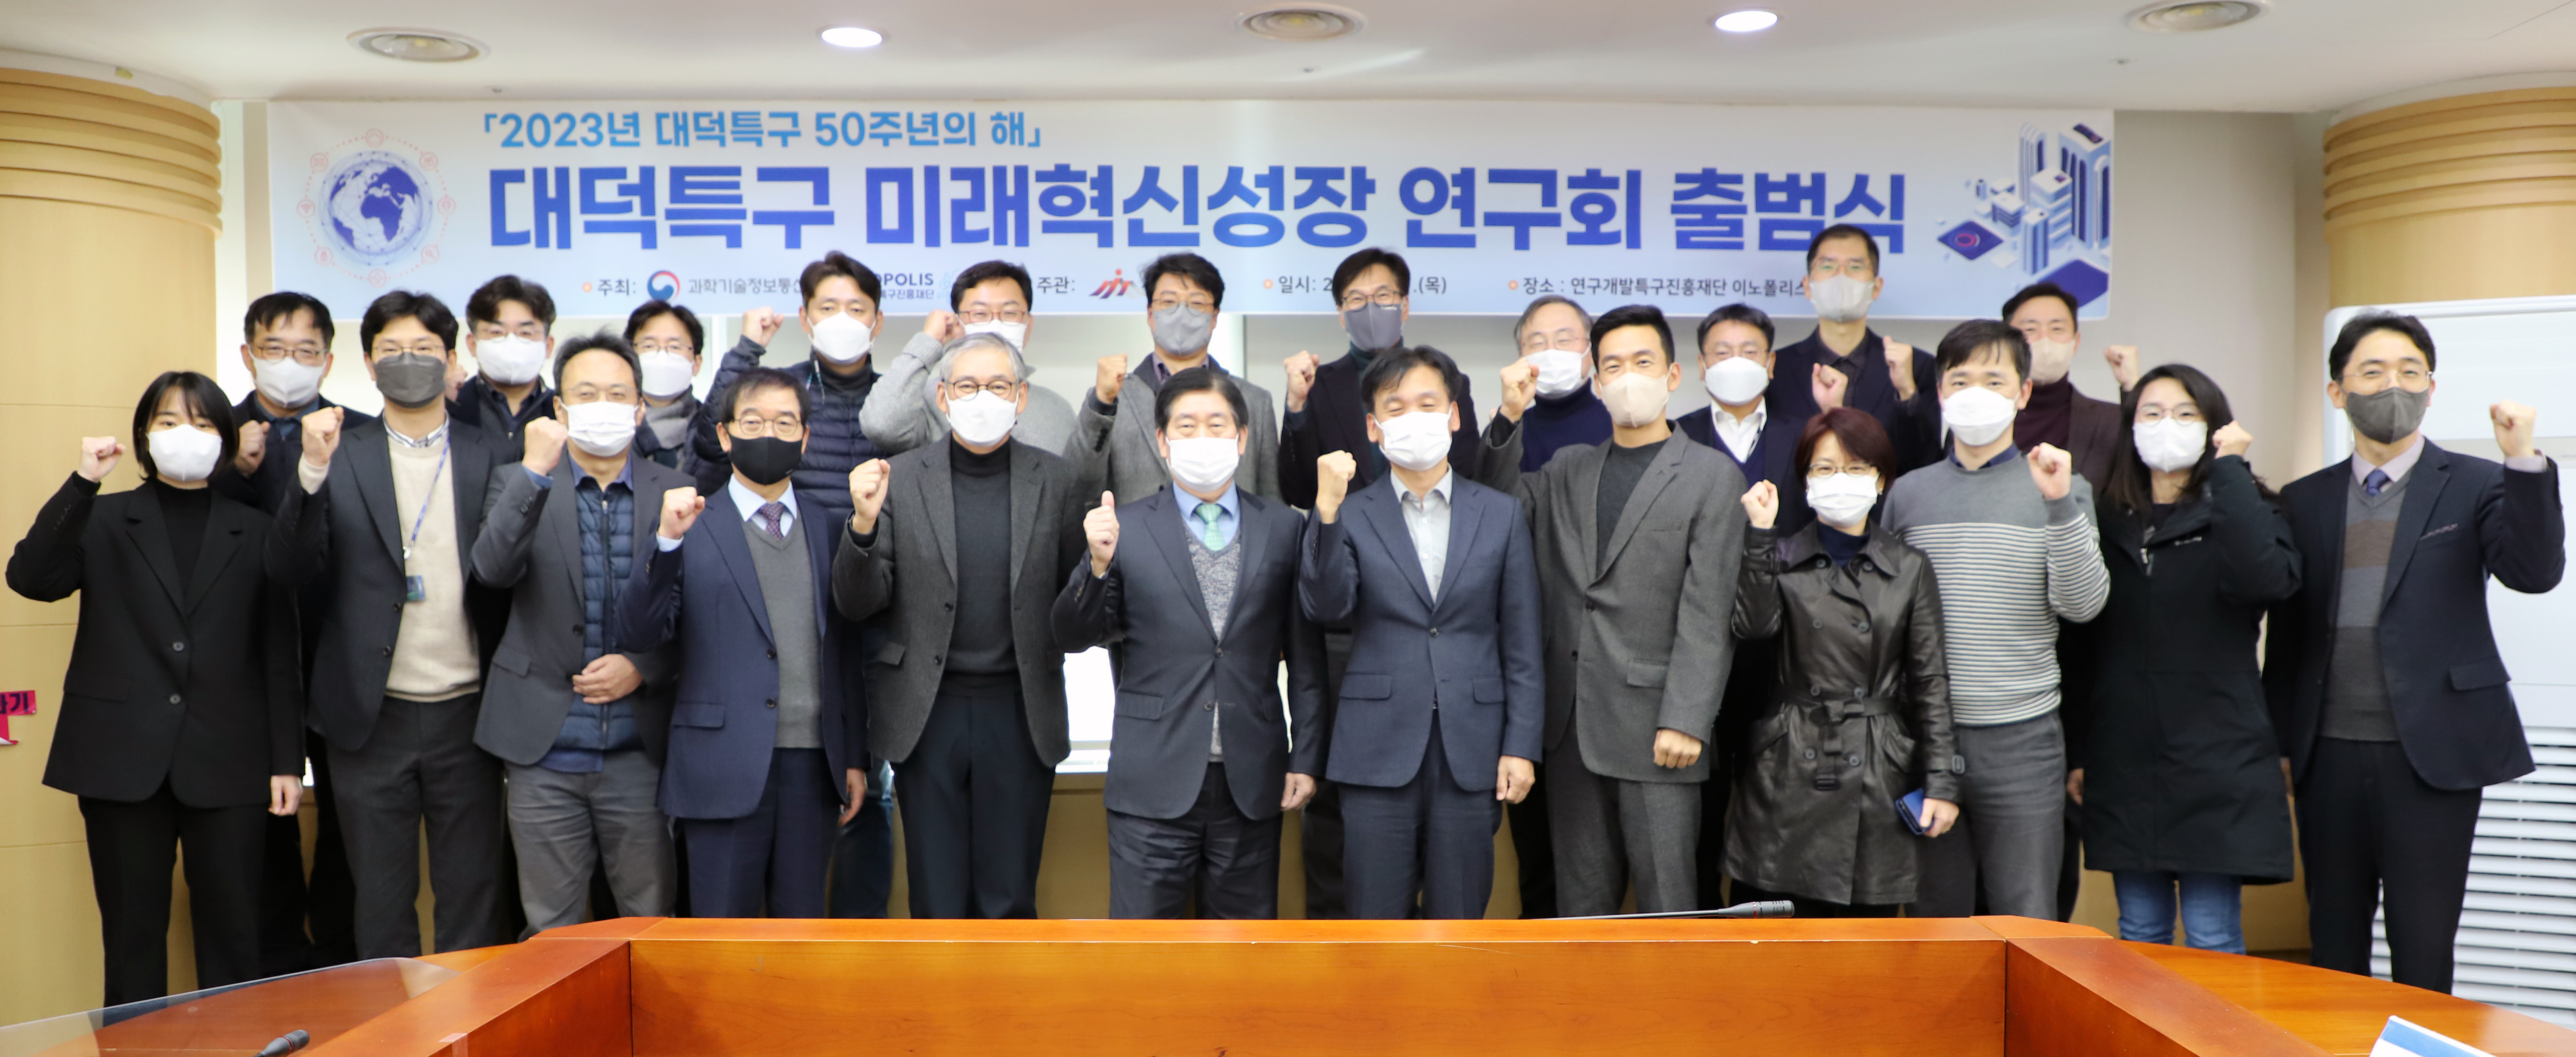 Korea Innovation Foundation, held the launching ceremony of the Future Innovation Growth Research Group